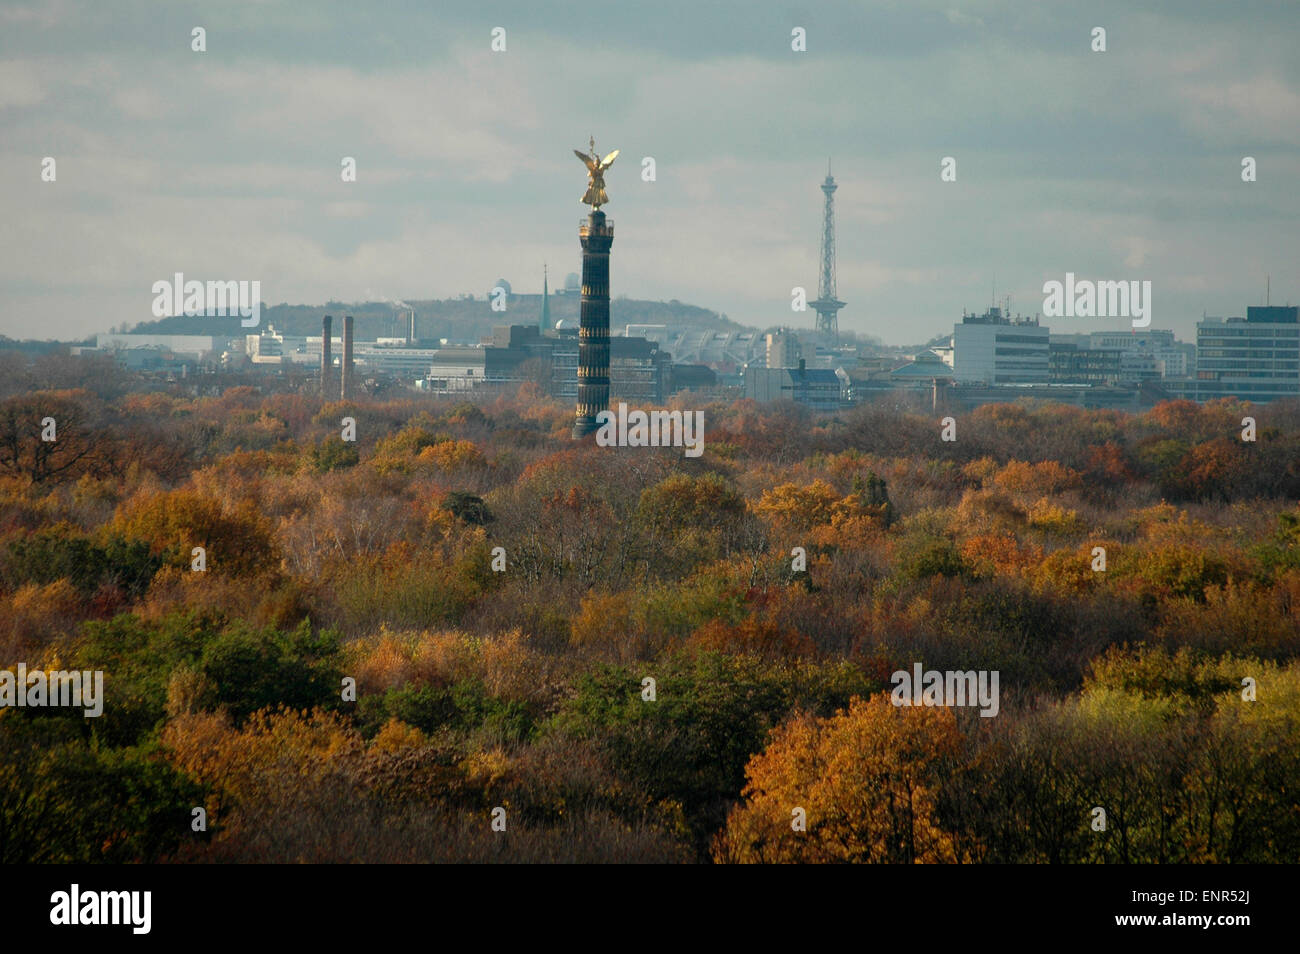 NOVEMBER 2005 - BERLIN: aerial view on the 'Siegessaeule' (Victory Column) and the Tiergarten, in the background the 'Funkturm', Berlin. Stock Photo